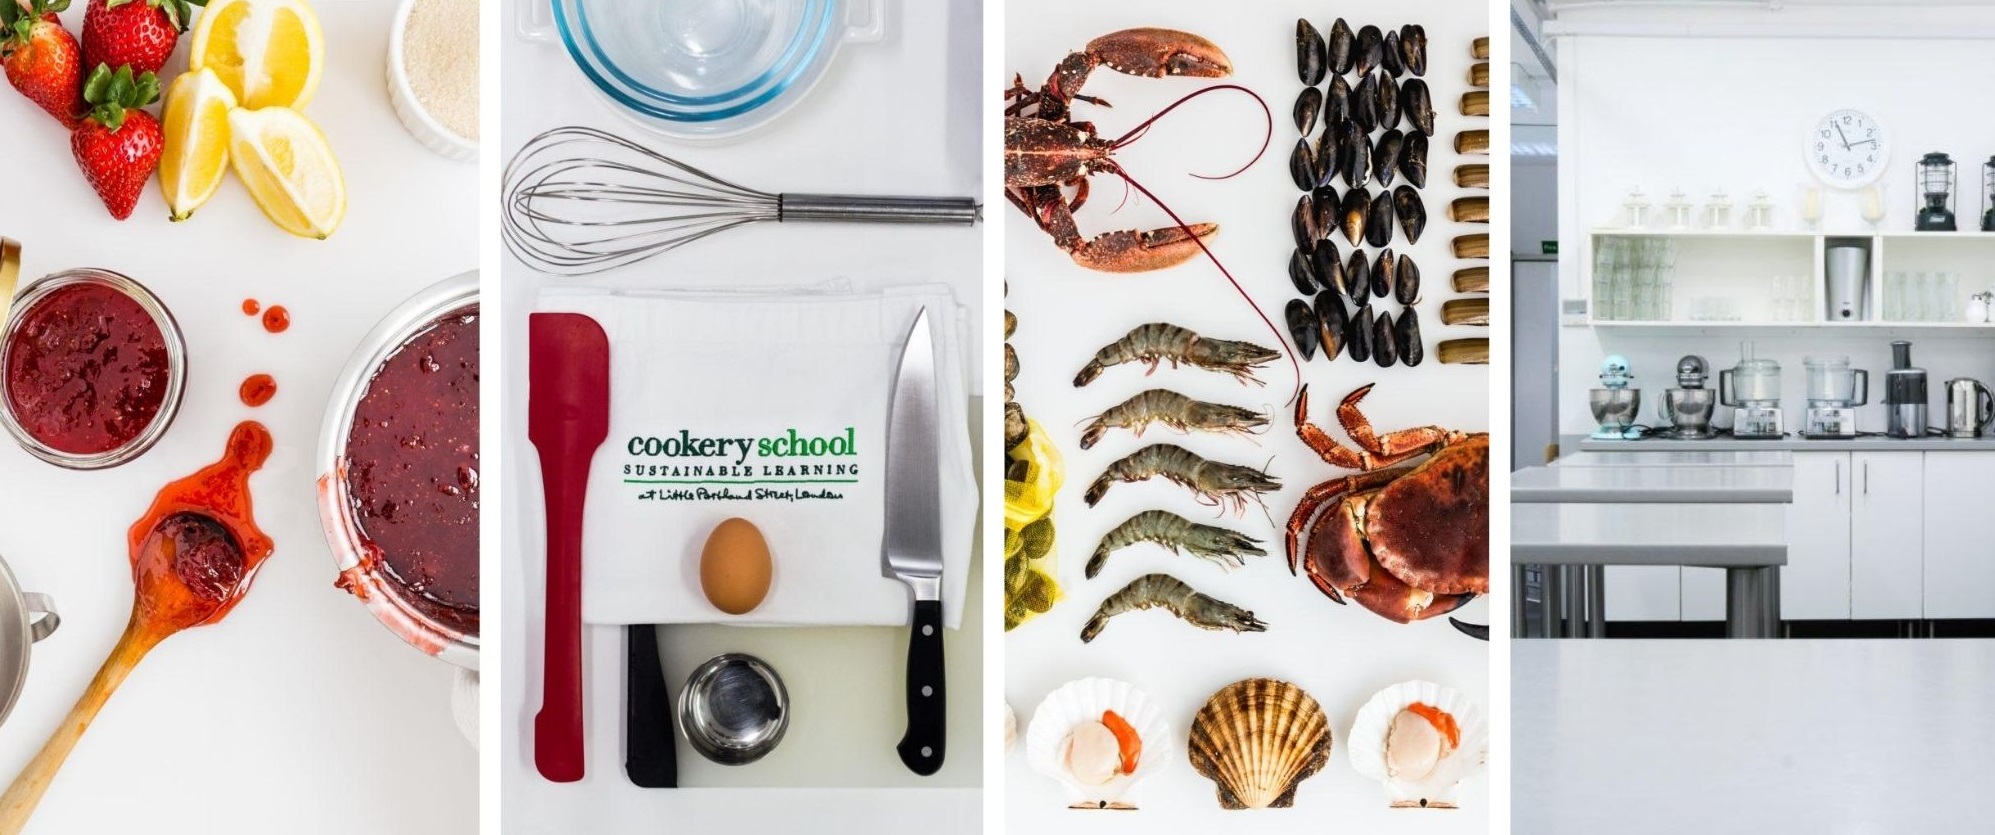 Give a cookery school class as a christmas gift